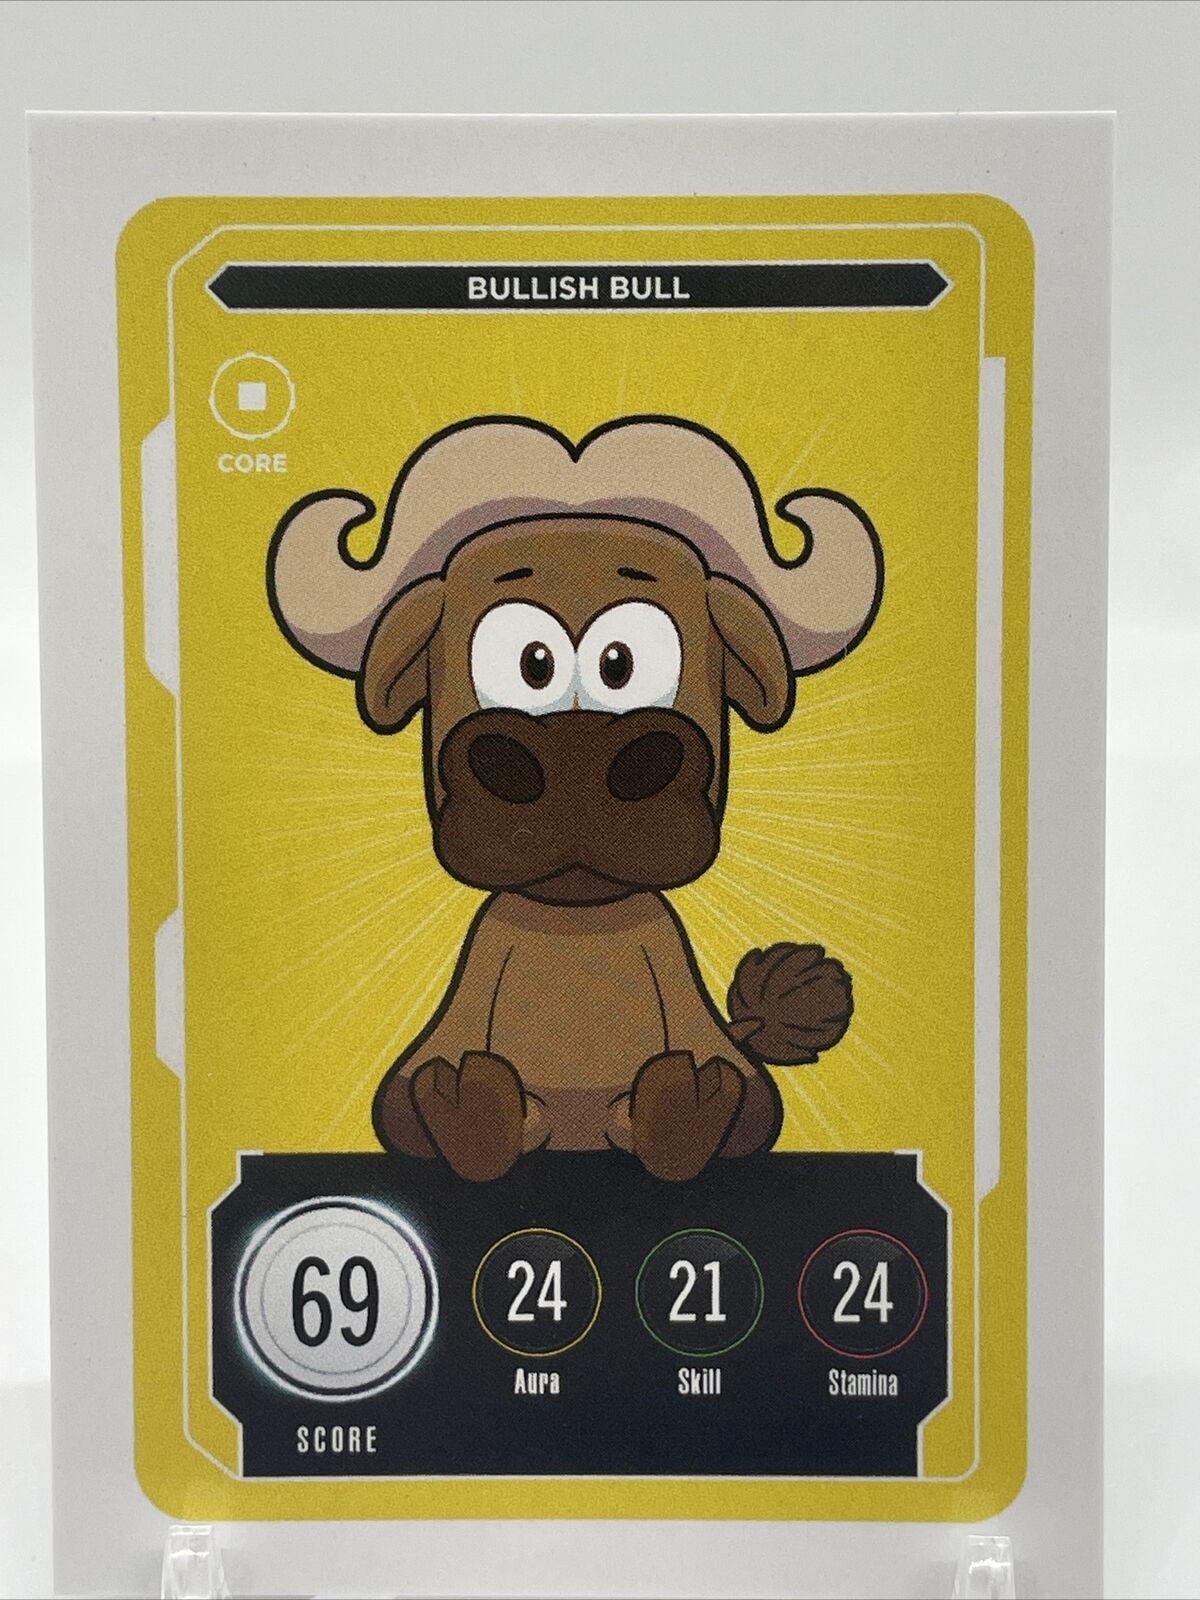 Bullish Bull Veefriends Core Series 2 Compete And Collect Trading Card Gary Vee